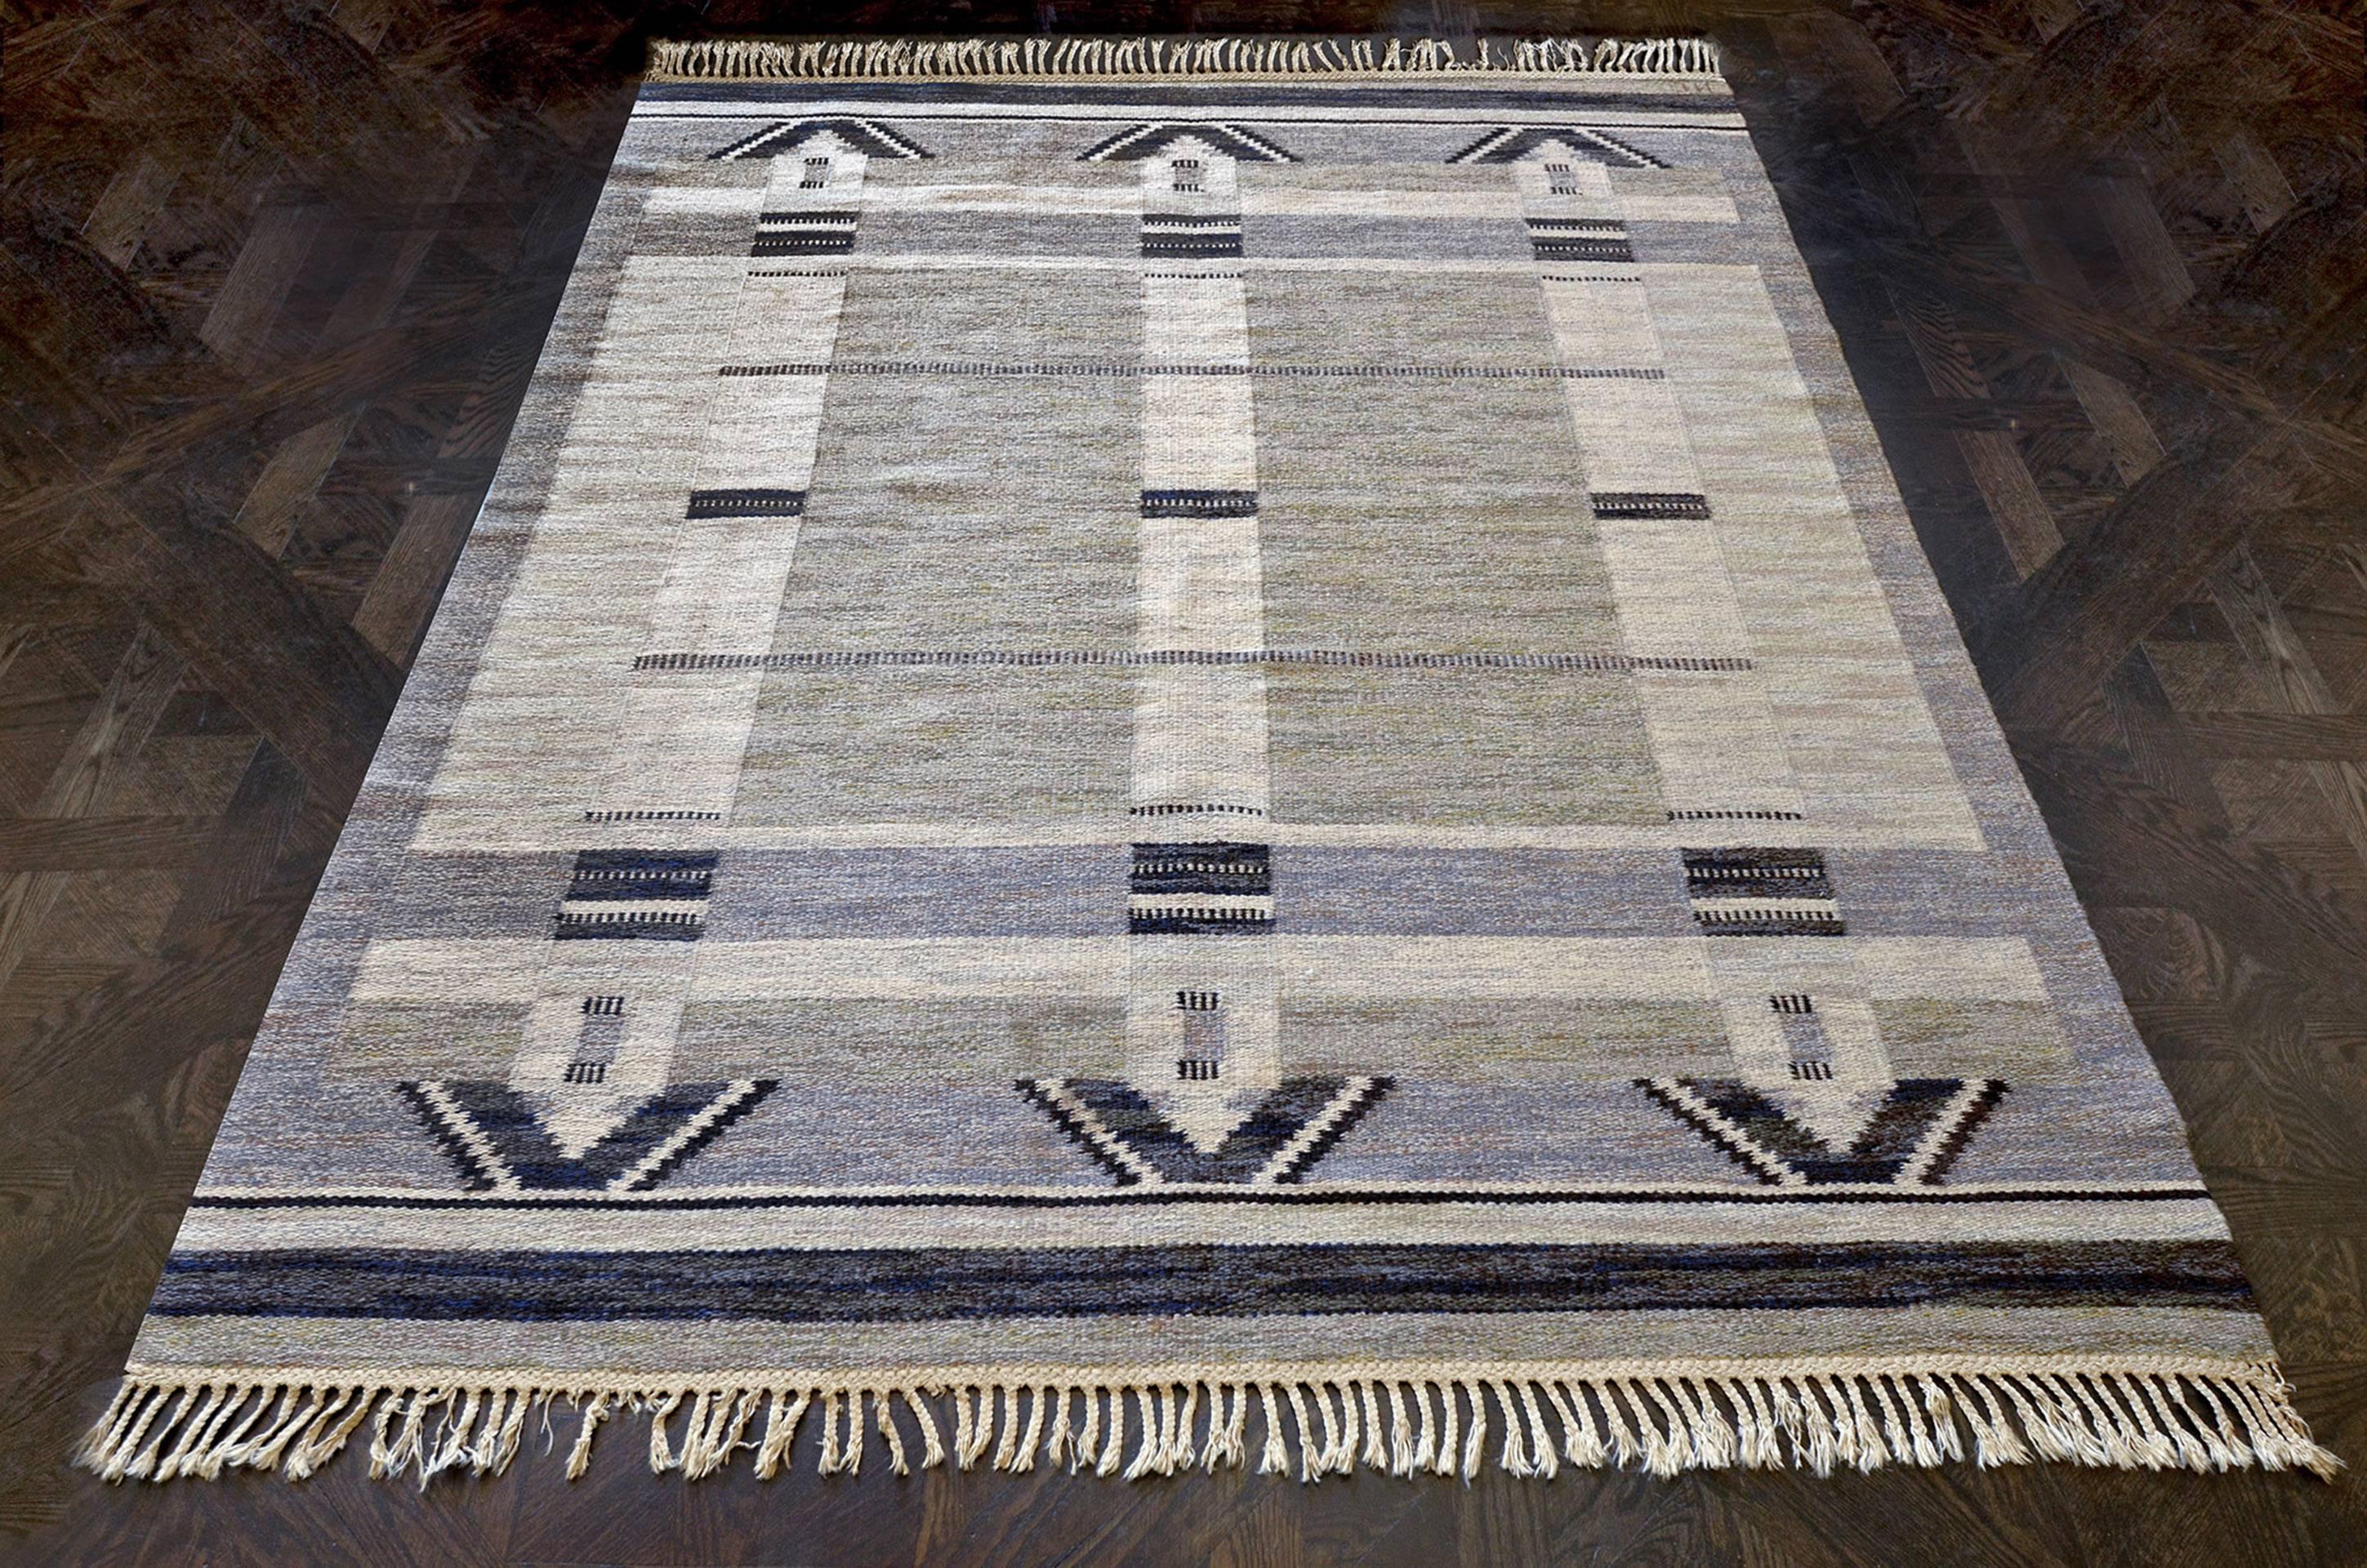 This vintage handwoven Swedish rug has a sandy gray field interrupted by triple ivory stripes with charcoal stepped half-lozenges at each end, capped by charcoal and ivory stripes at each end. Signed by the original artist and workshop.

About Märta